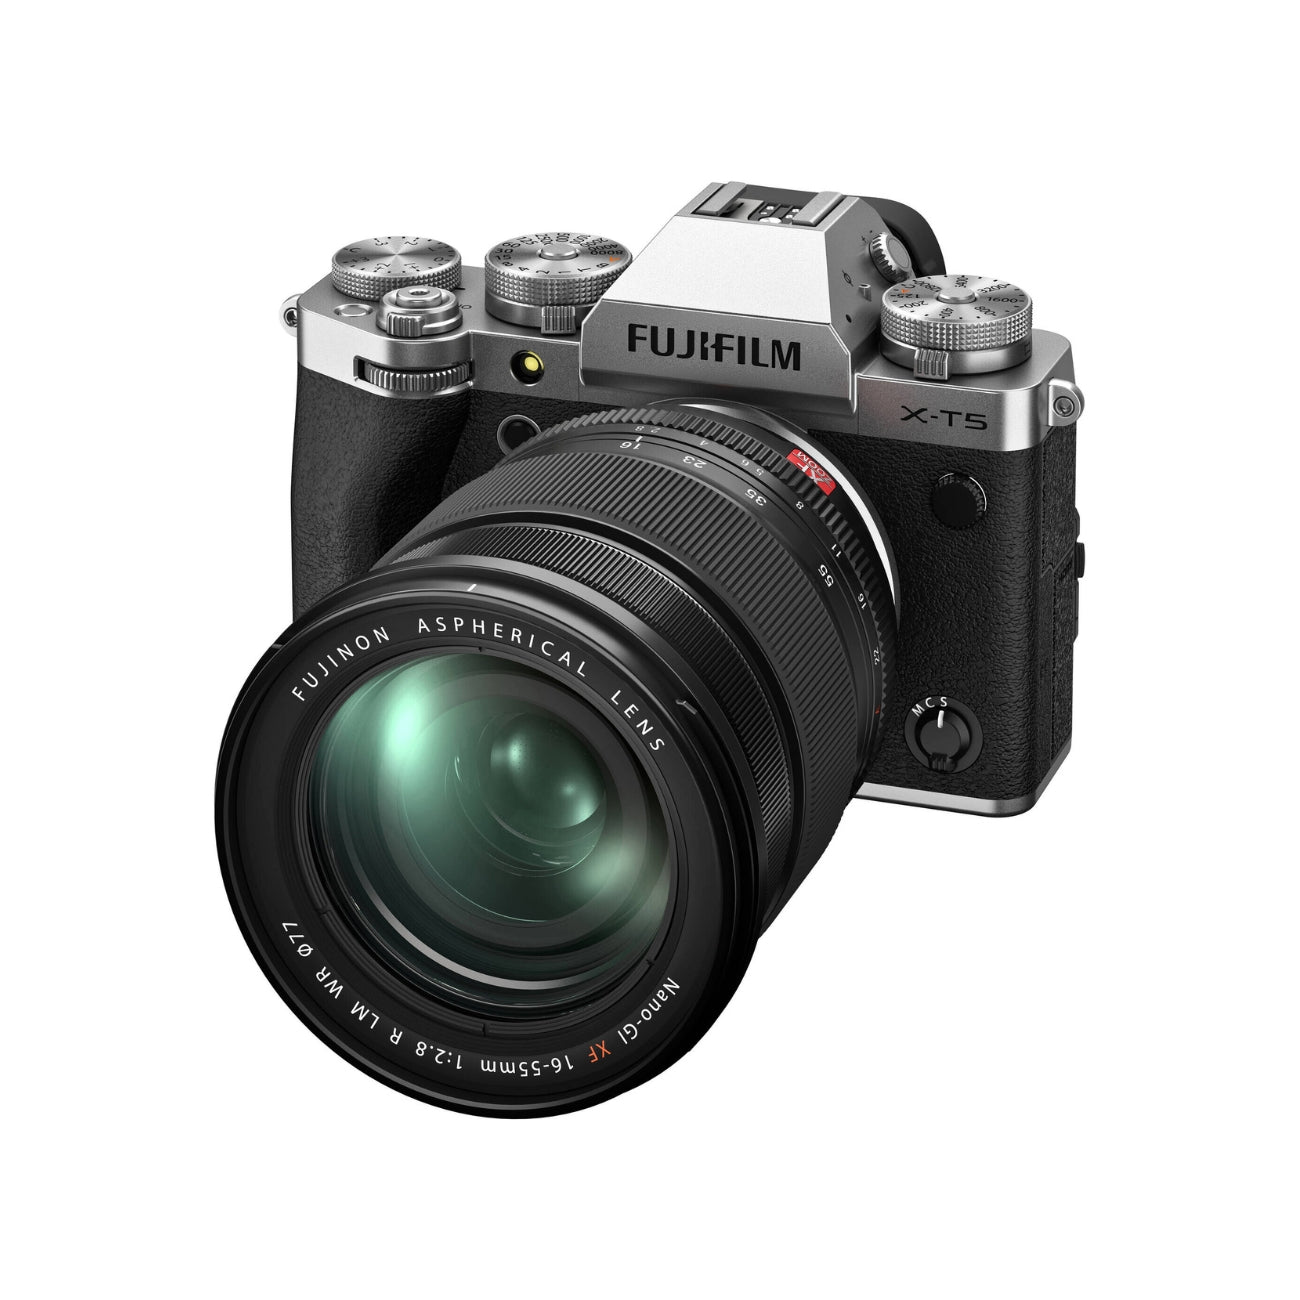 Distant view of the Fujifilm X-T5 (Silver) with lens